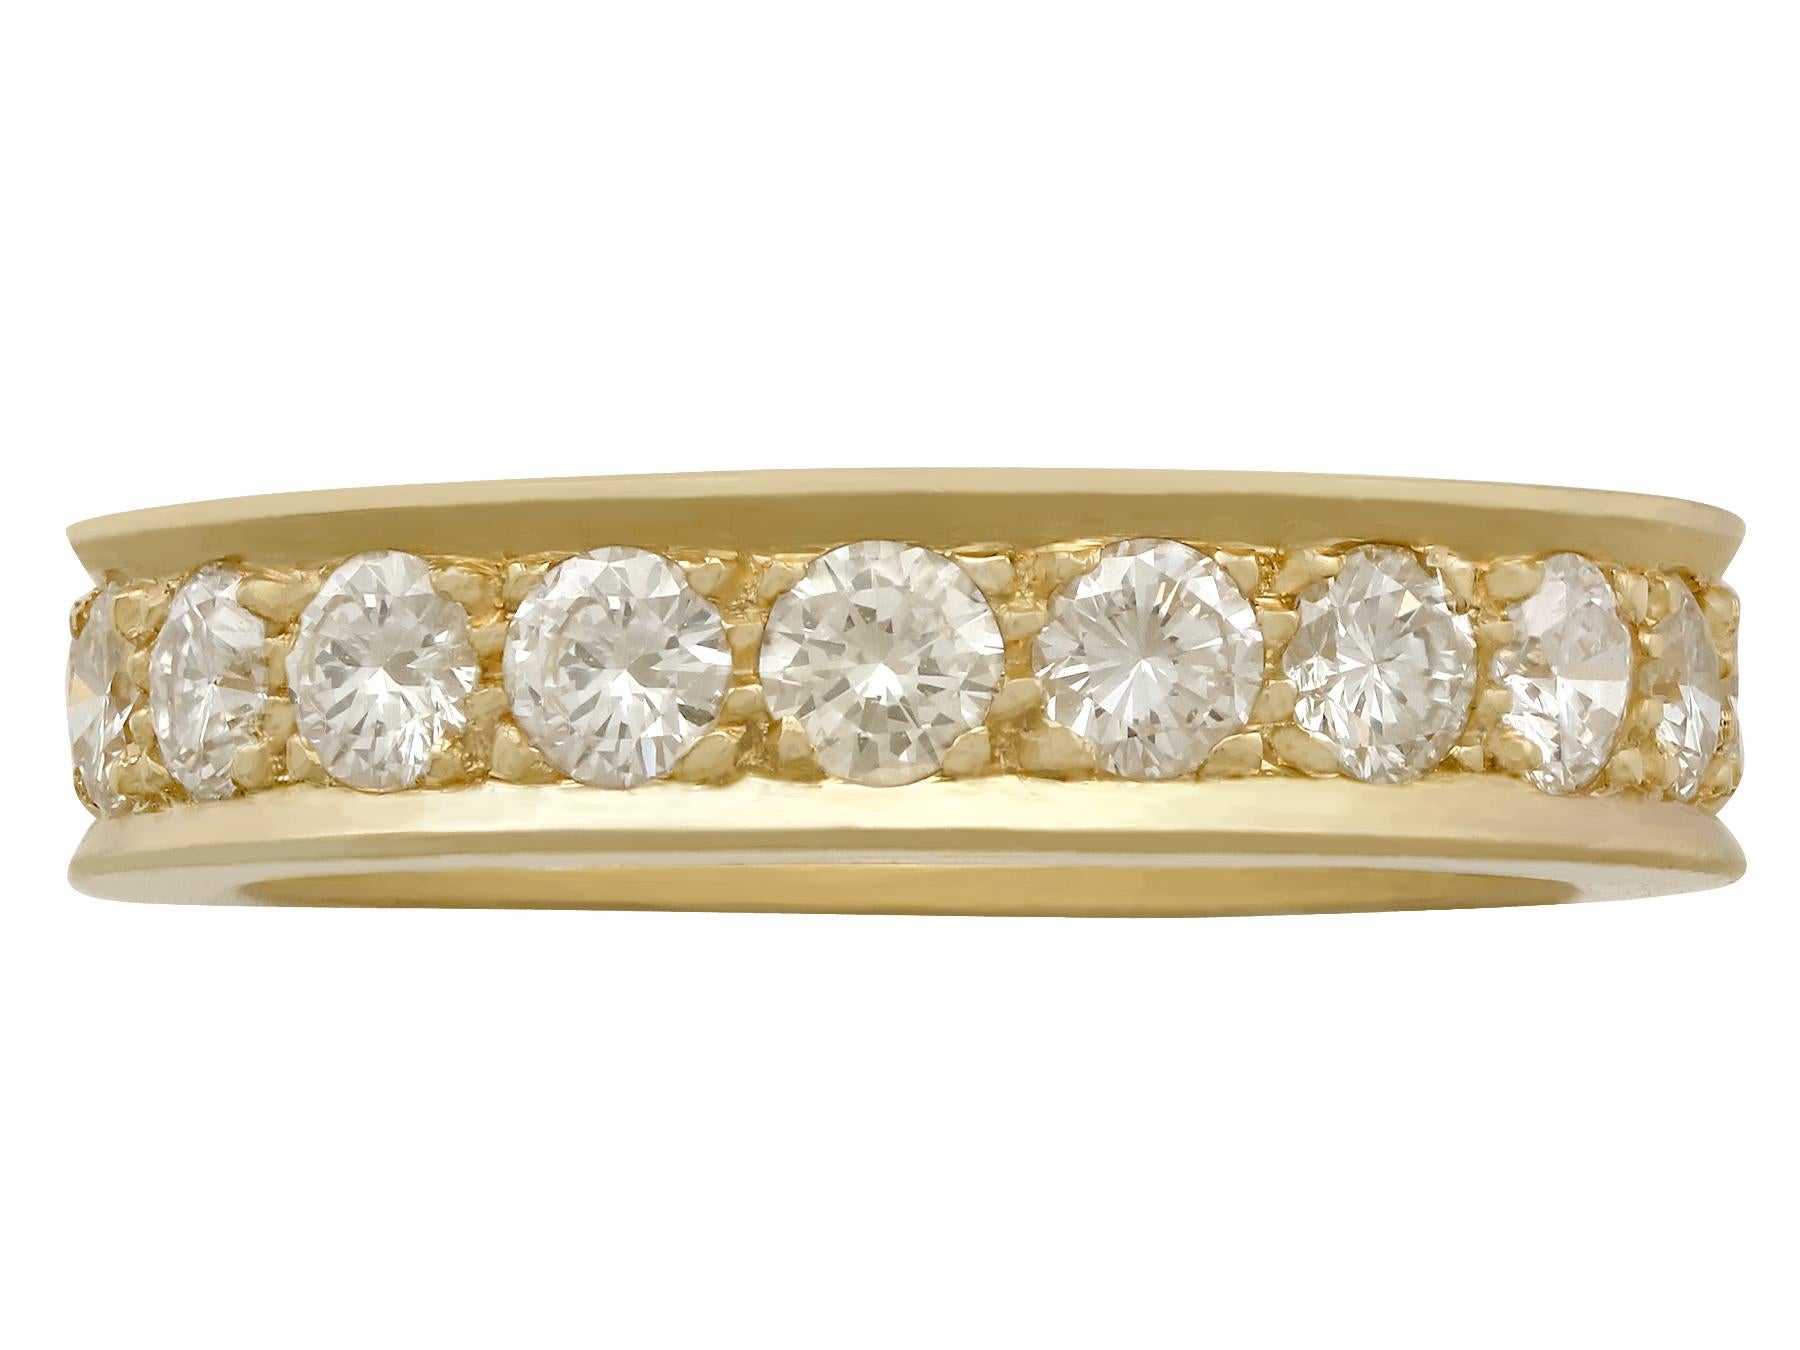 A stunning vintage 1980s 2.22 carat diamond and 18 karat yellow gold full eternity ring; part of our diverse diamond jewelry and estate jewelry collections.

This stunning, fine and impressive vintage eternity ring has been crafted in 18k yellow